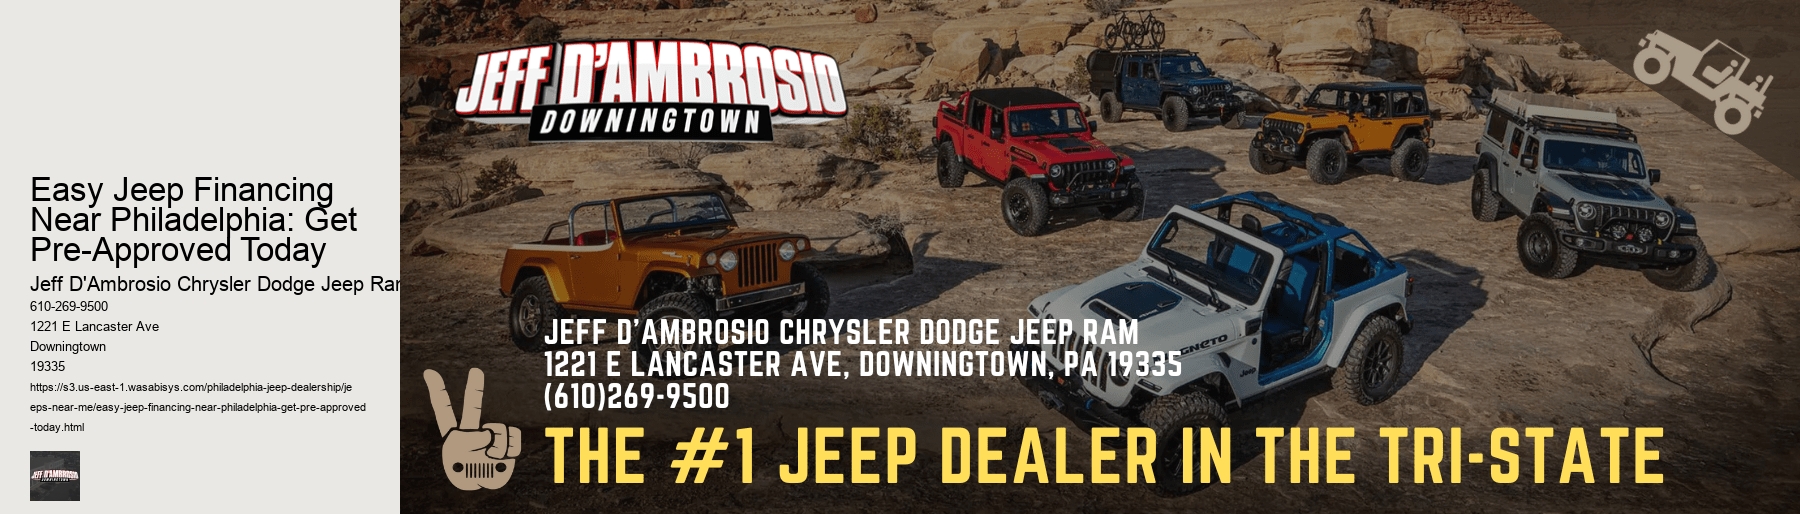 Easy Jeep Financing Near Philadelphia: Get Pre-Approved Today